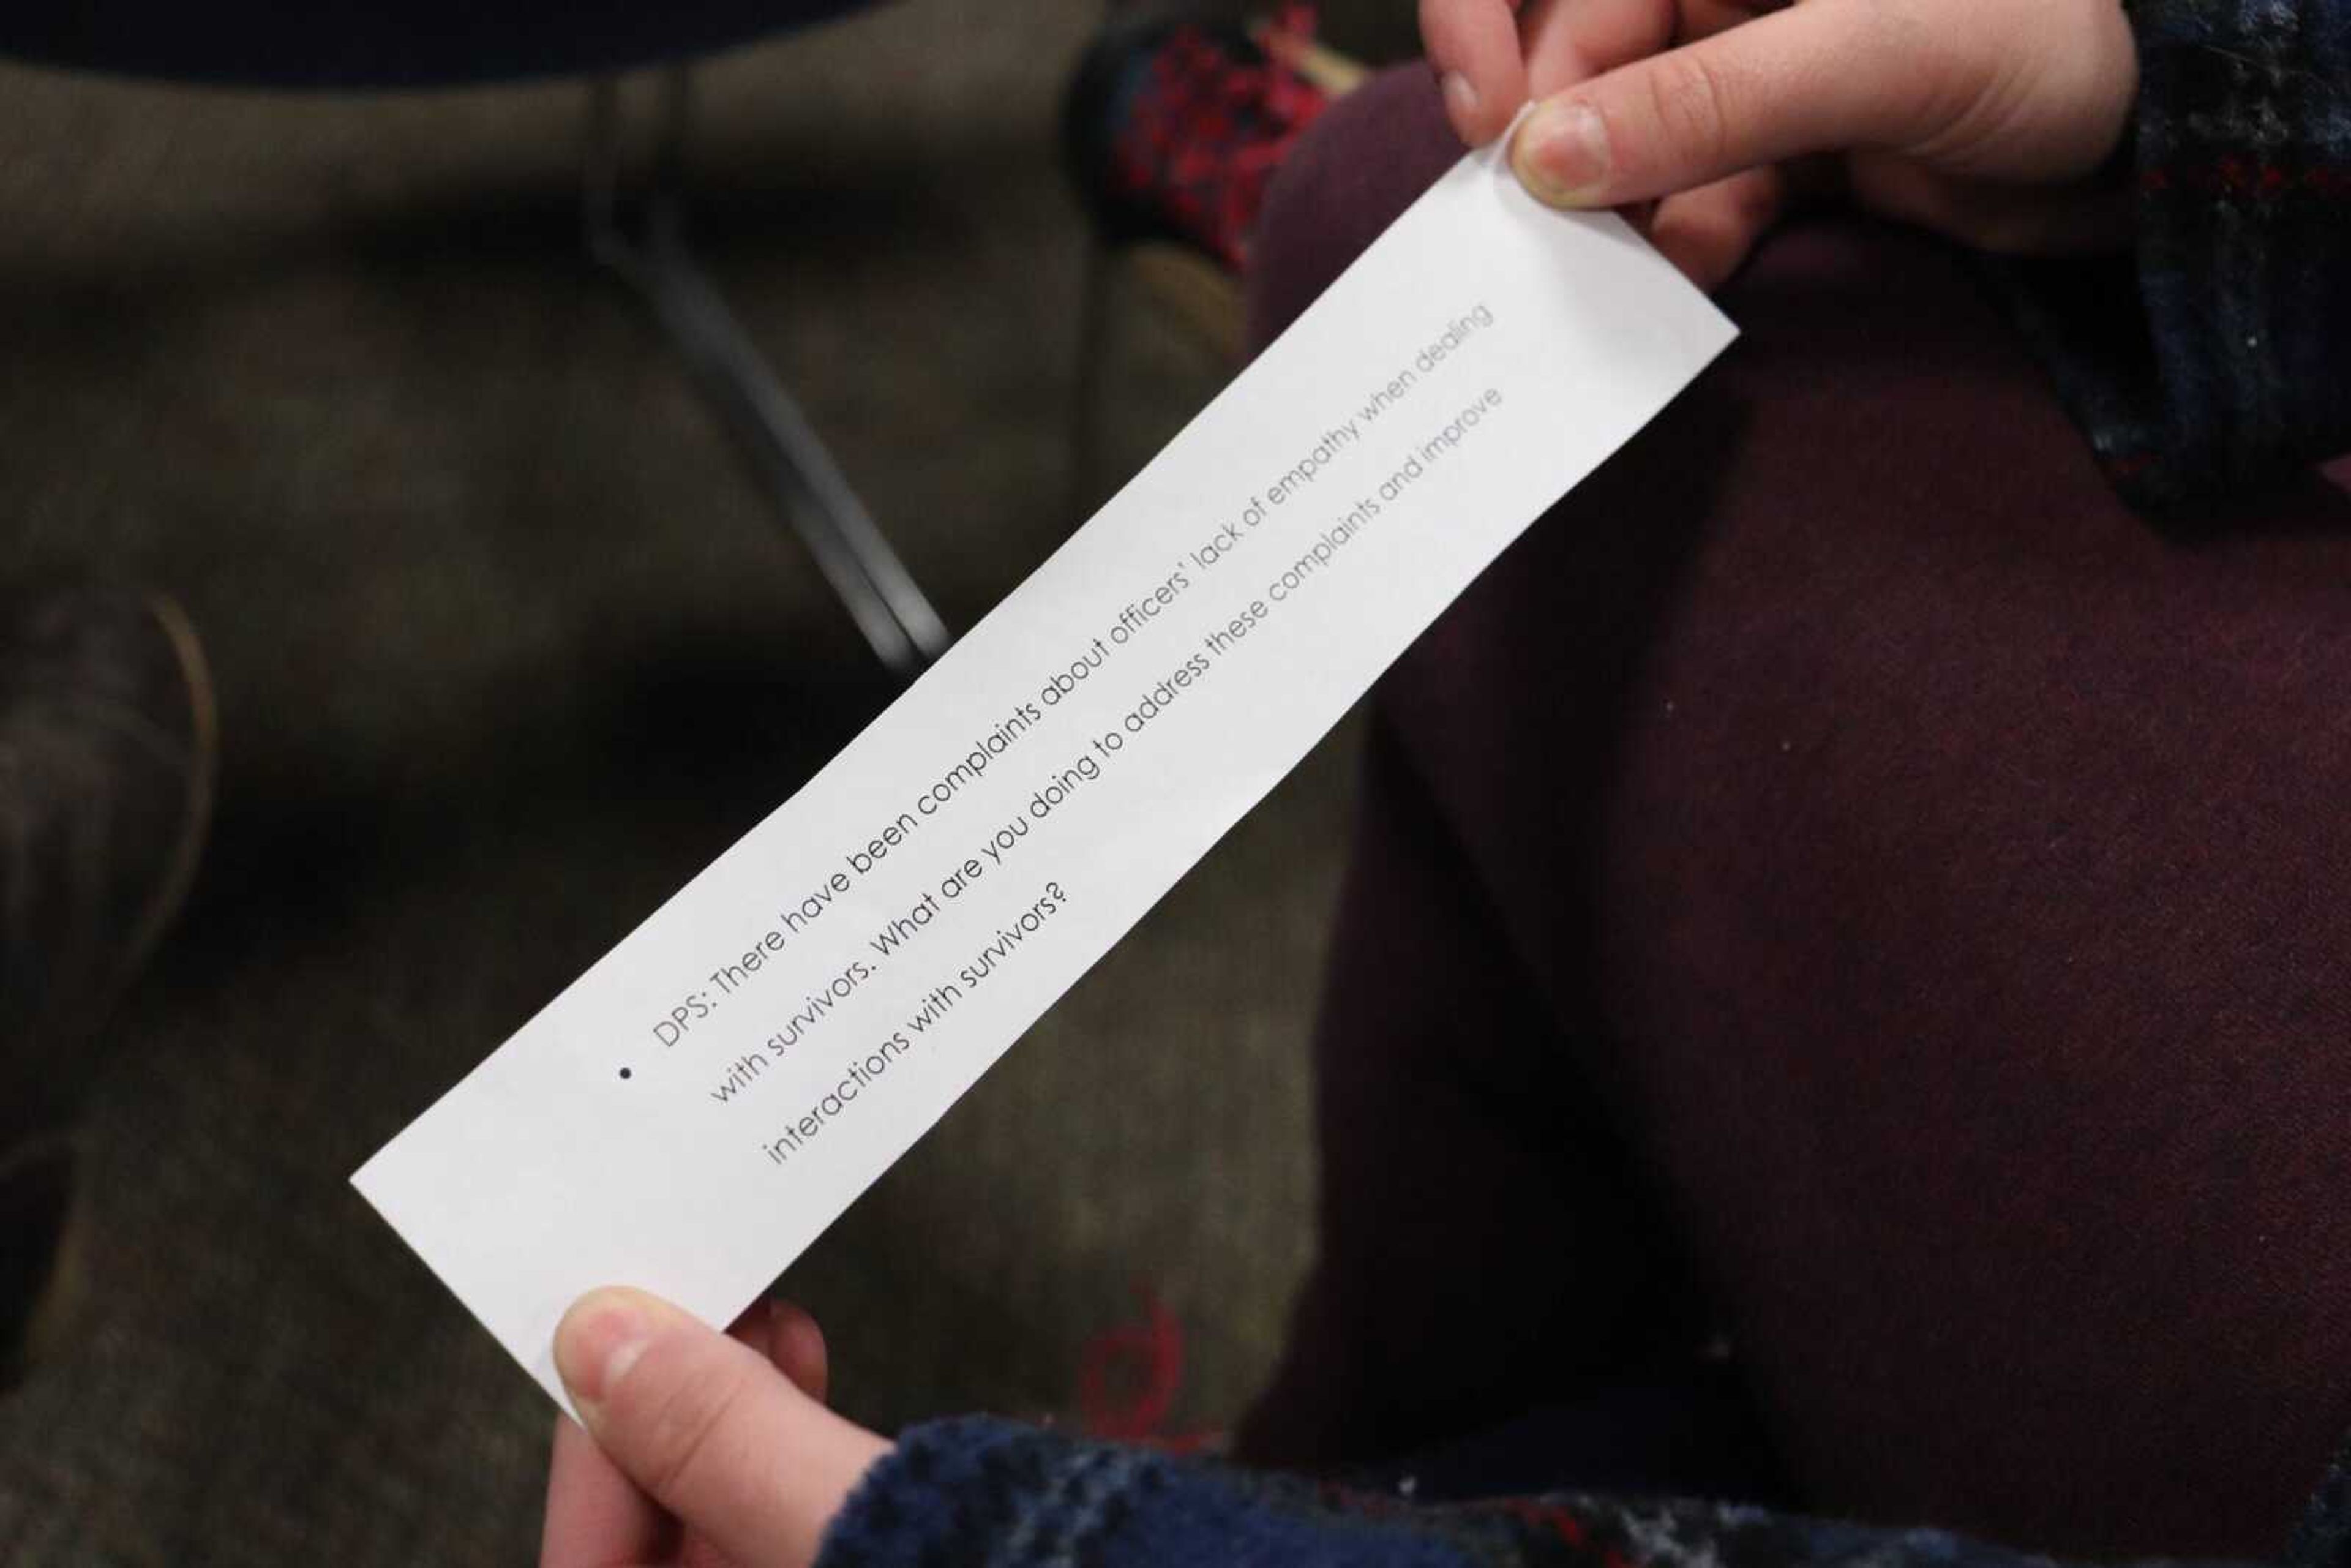 Jessica Strunk printed out questions for audience members to get involved in the conversation during the panel discussion.